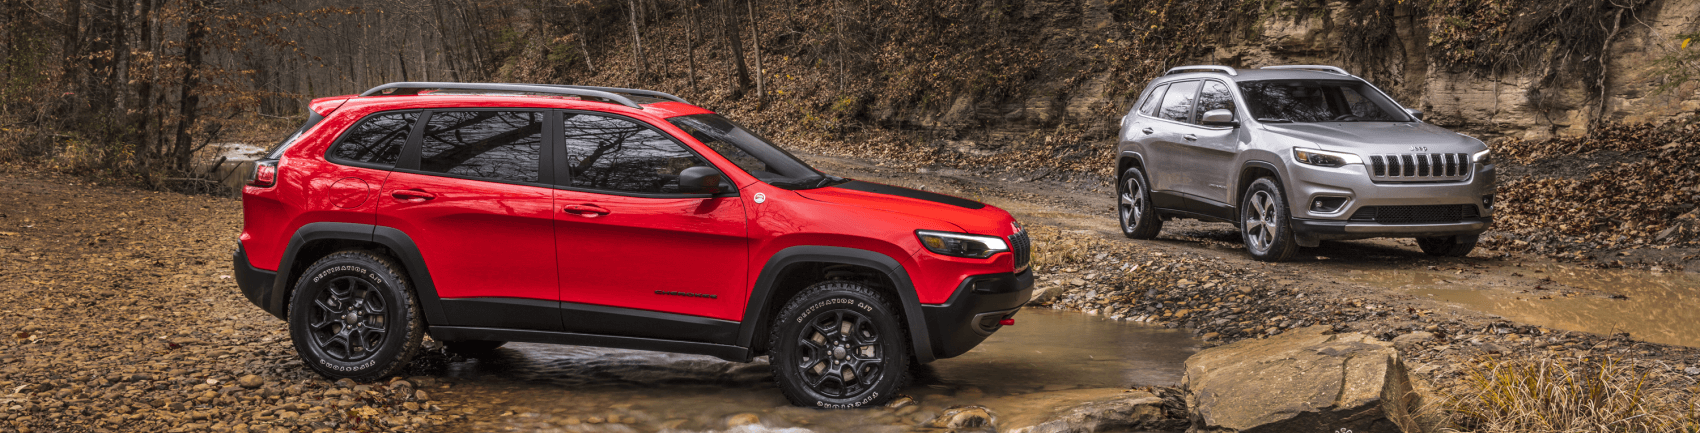 2021 Jeep Cherokee Trailhawk Limited Red Silver Stream Tunkhannock Auto Mart